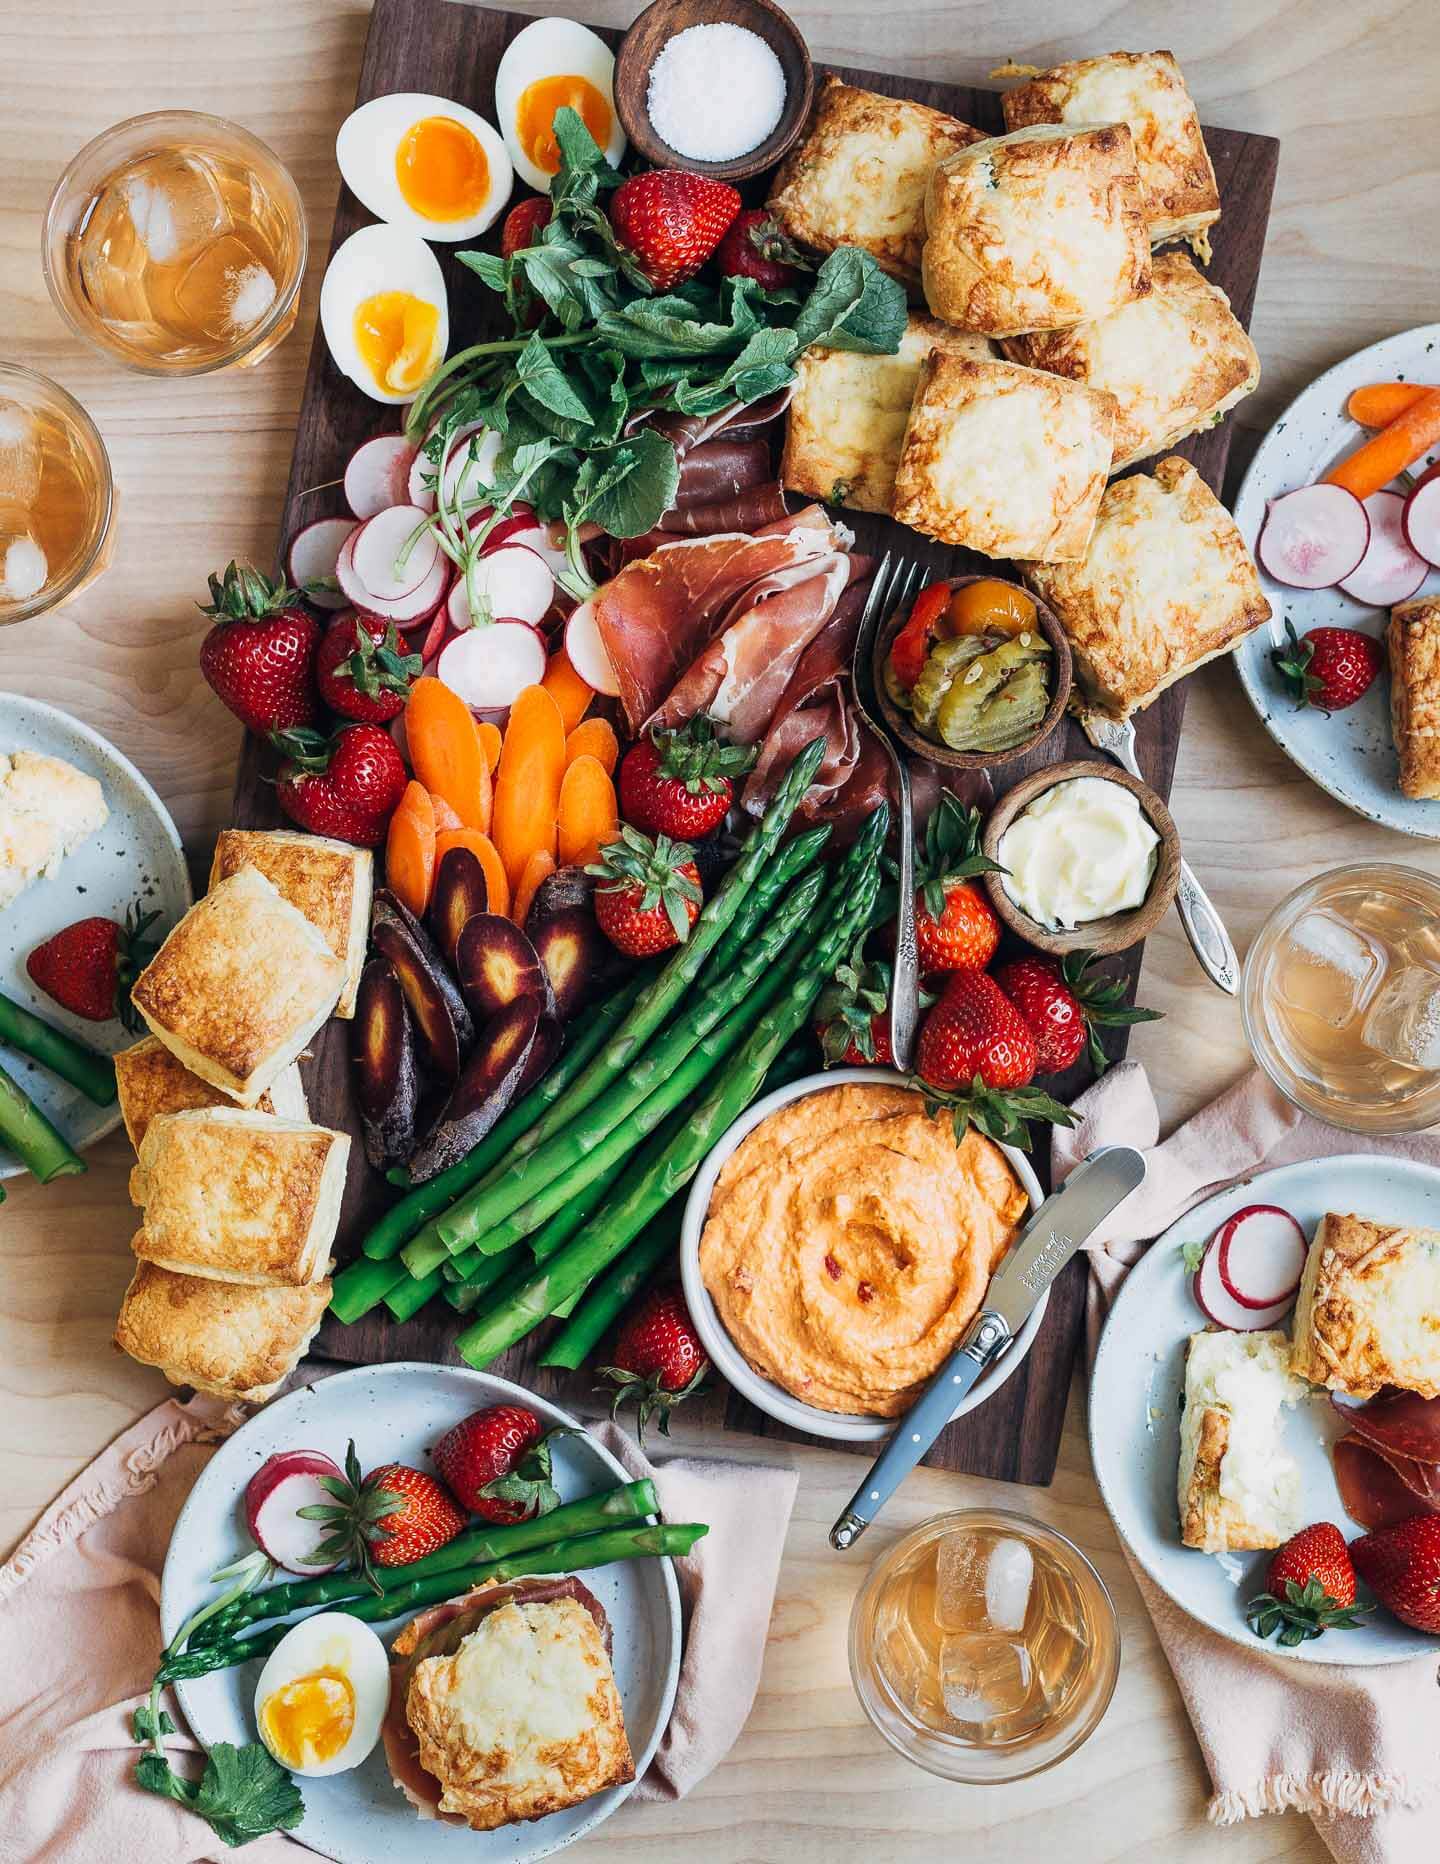 A crowded tabletop with a biscuit board, drinks, and little plates with food. 